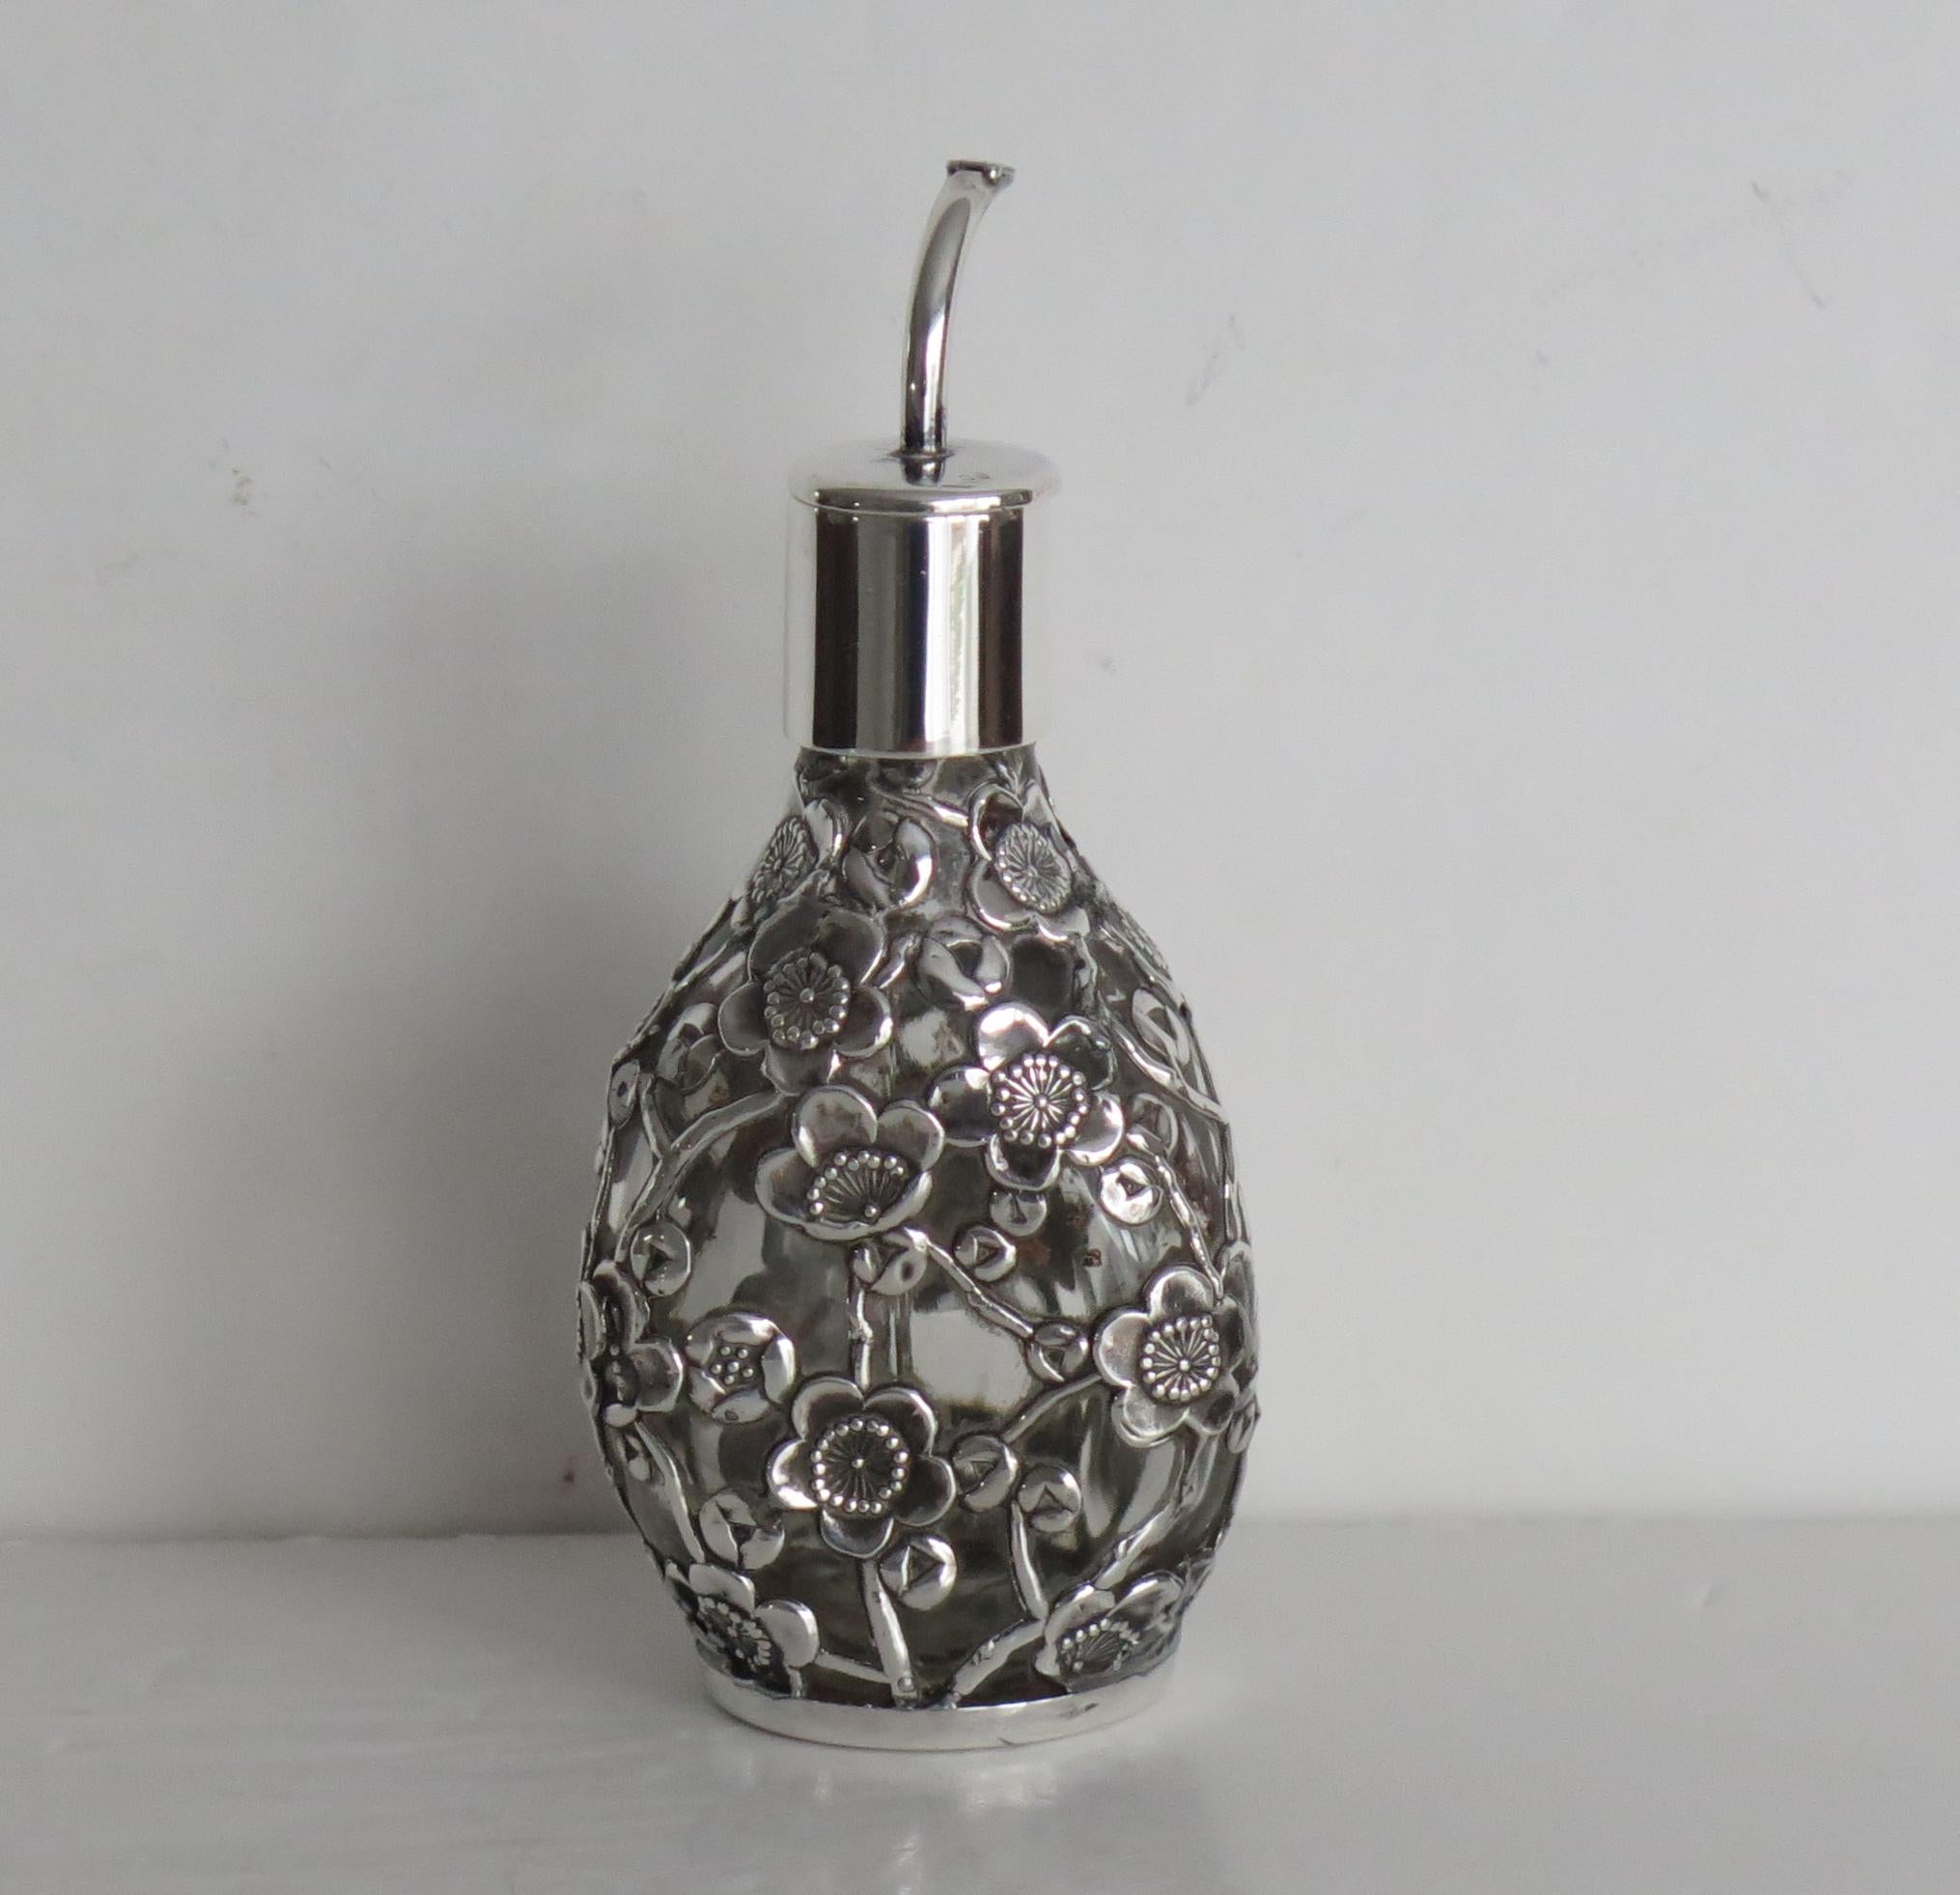 English Edwardian Perfume or Scent Bottle Sterling Silver Filigree over Glass, Ca 1900